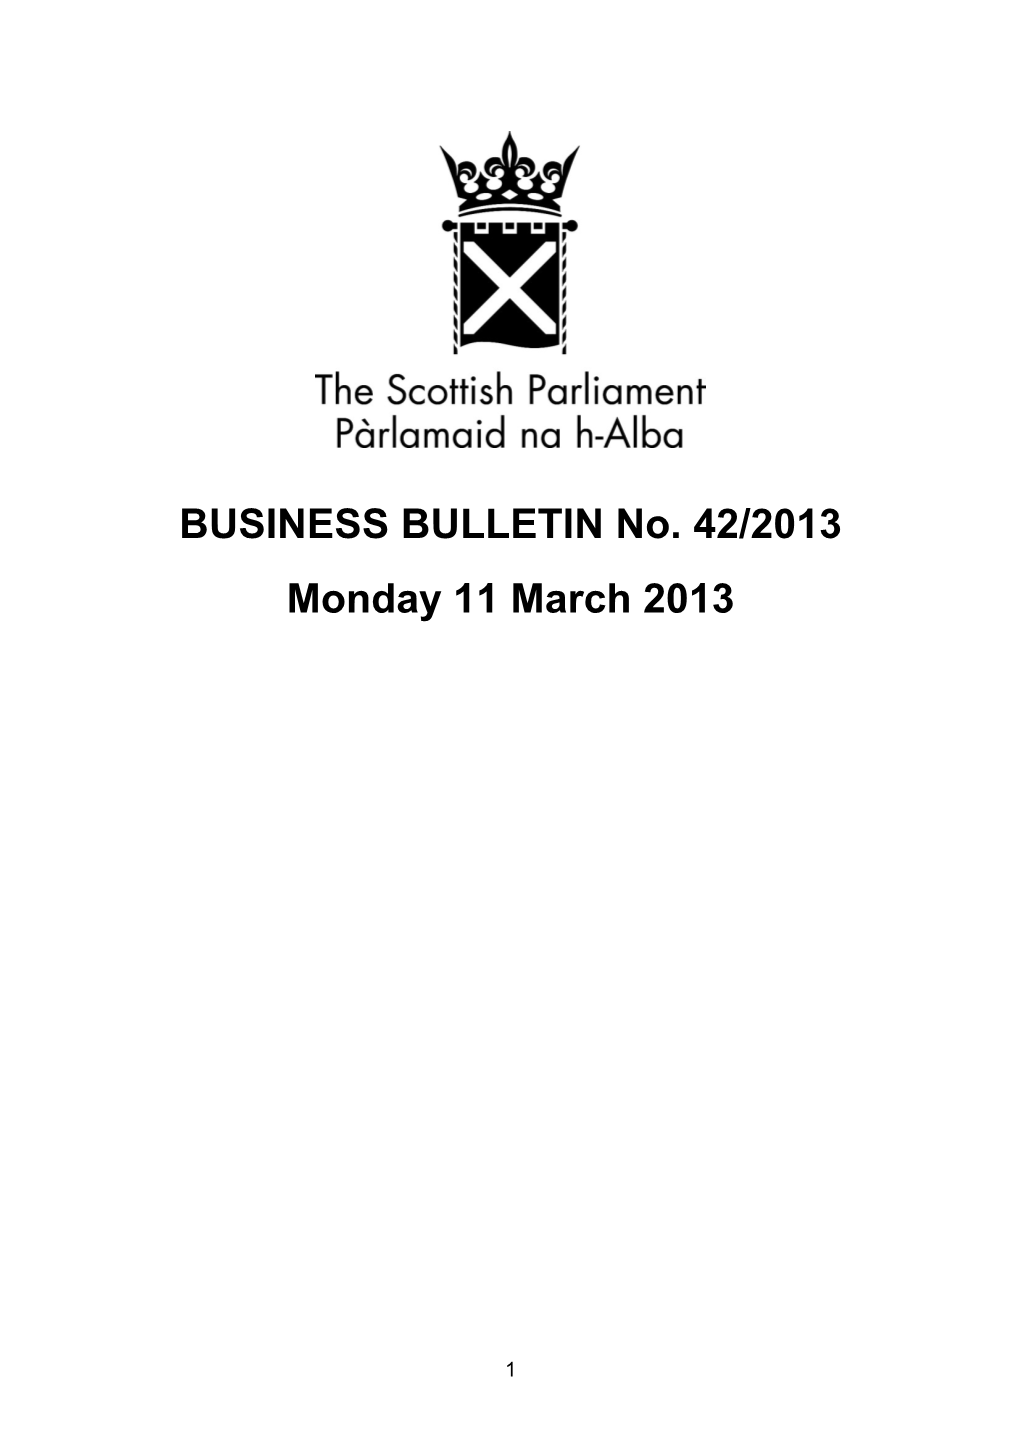 BUSINESS BULLETIN No. 42/2013 Monday 11 March 2013